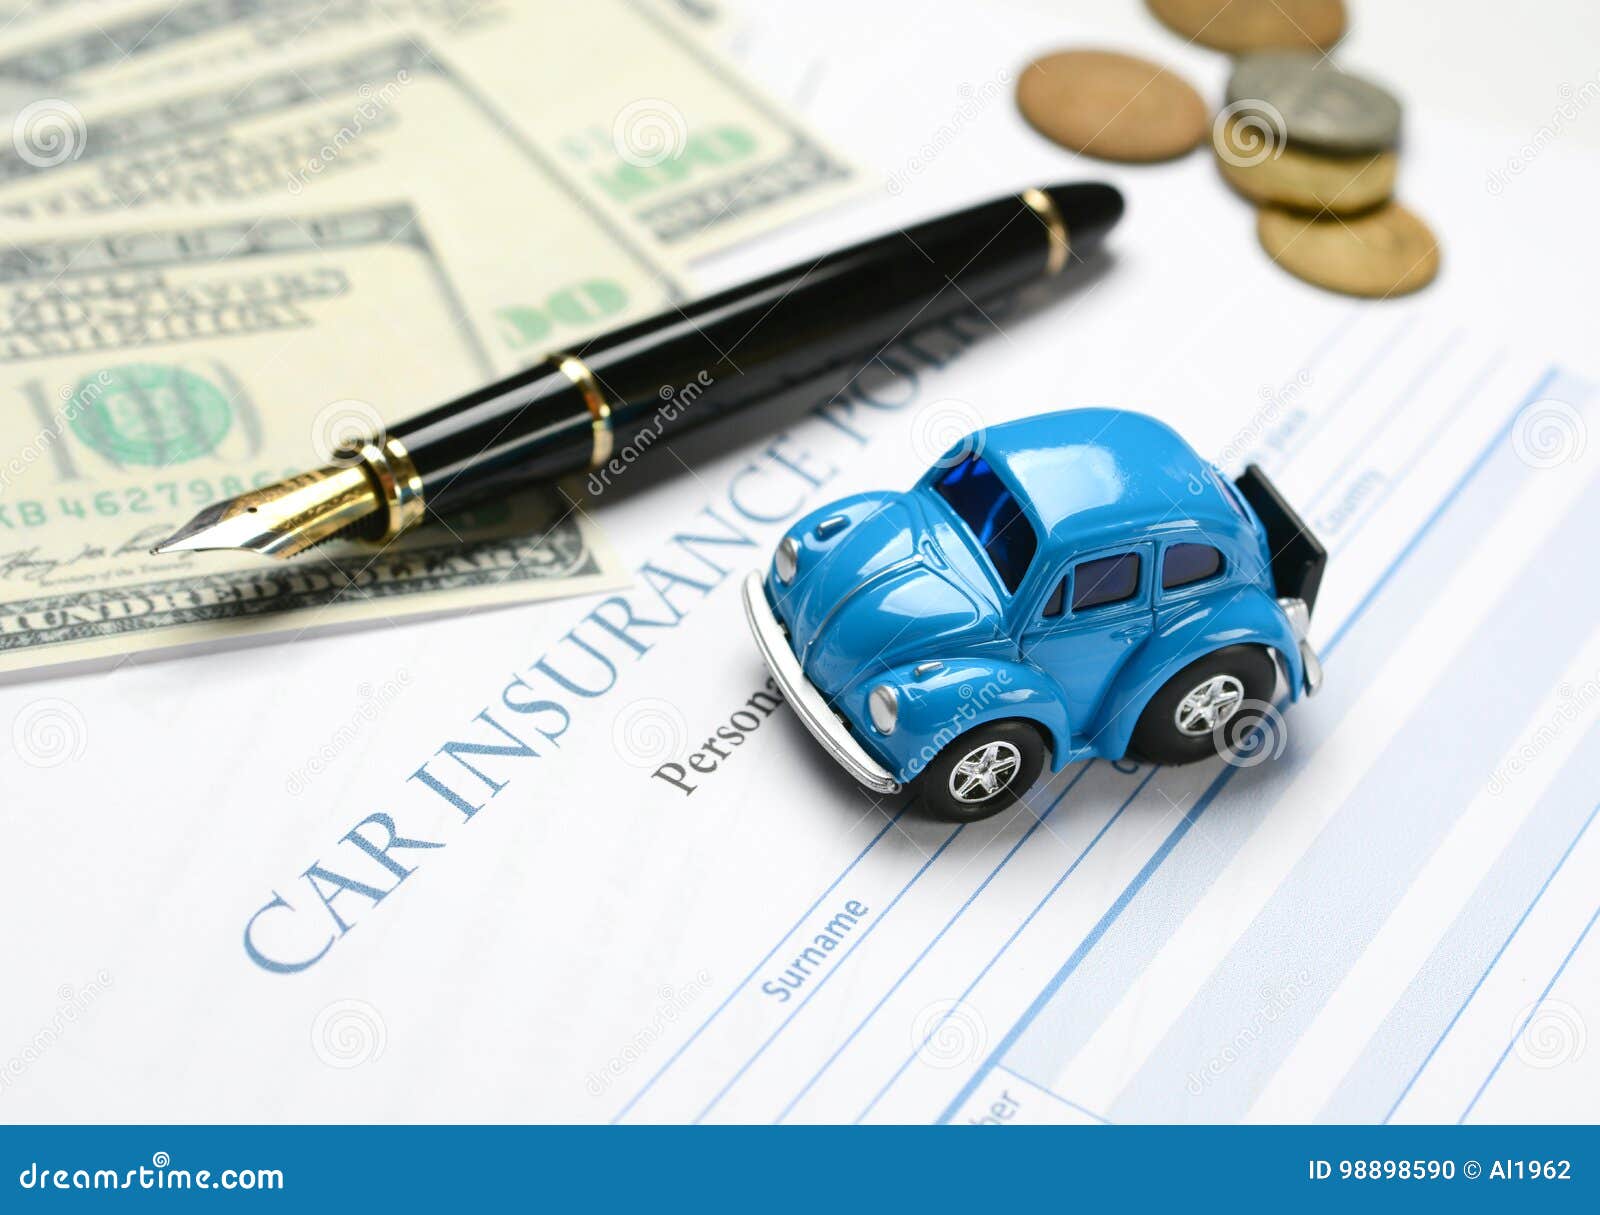 Car Insurance Policy With Pen And Money Around Stock Photo